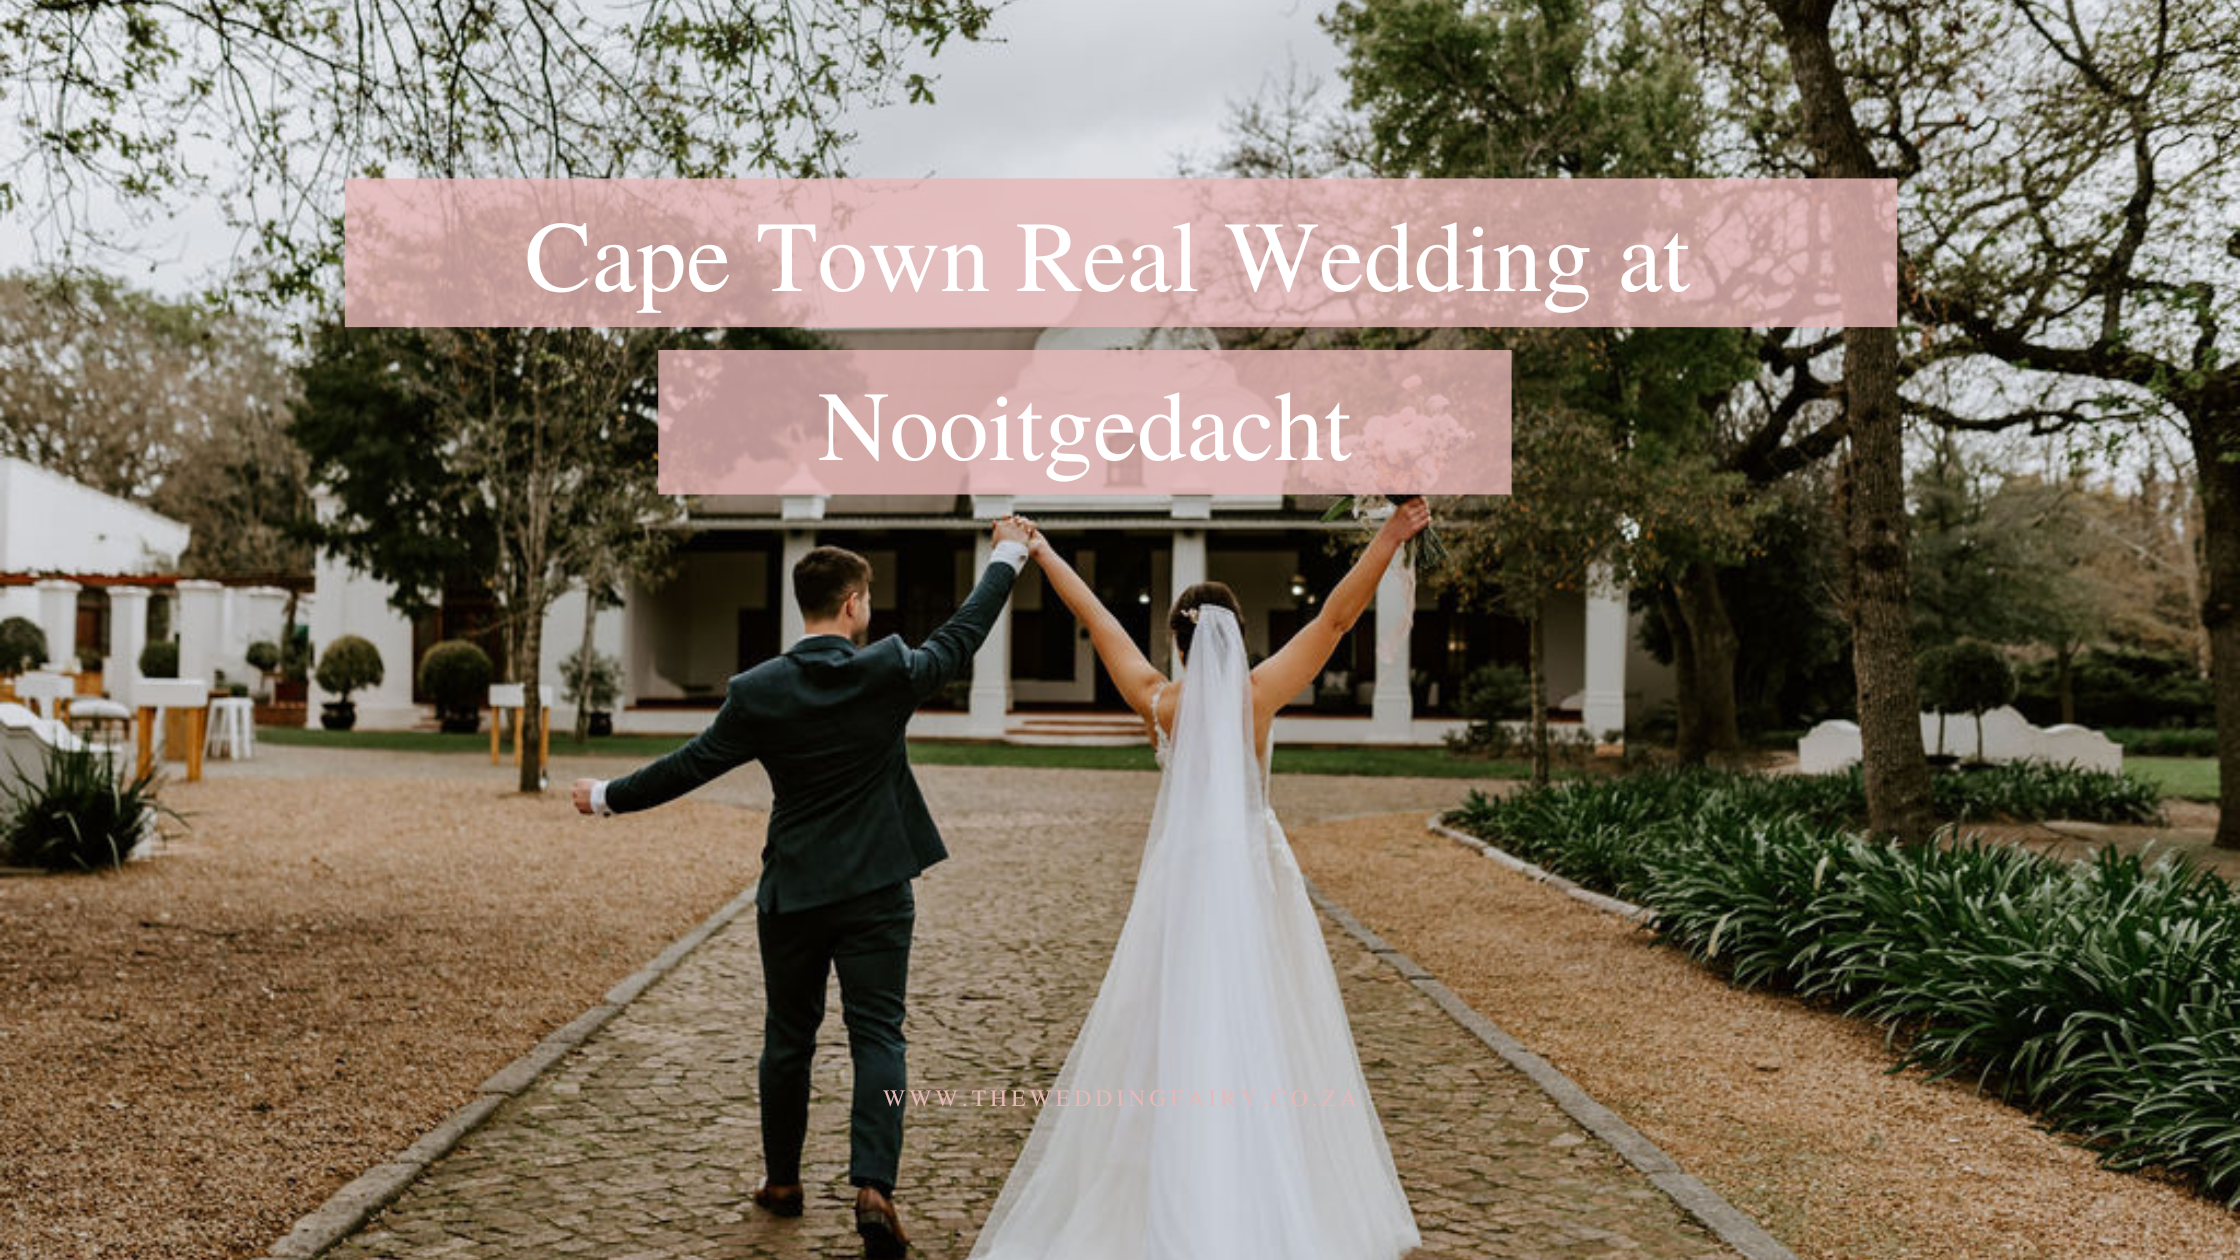 Cape Town Wedding at Nooitgedacht